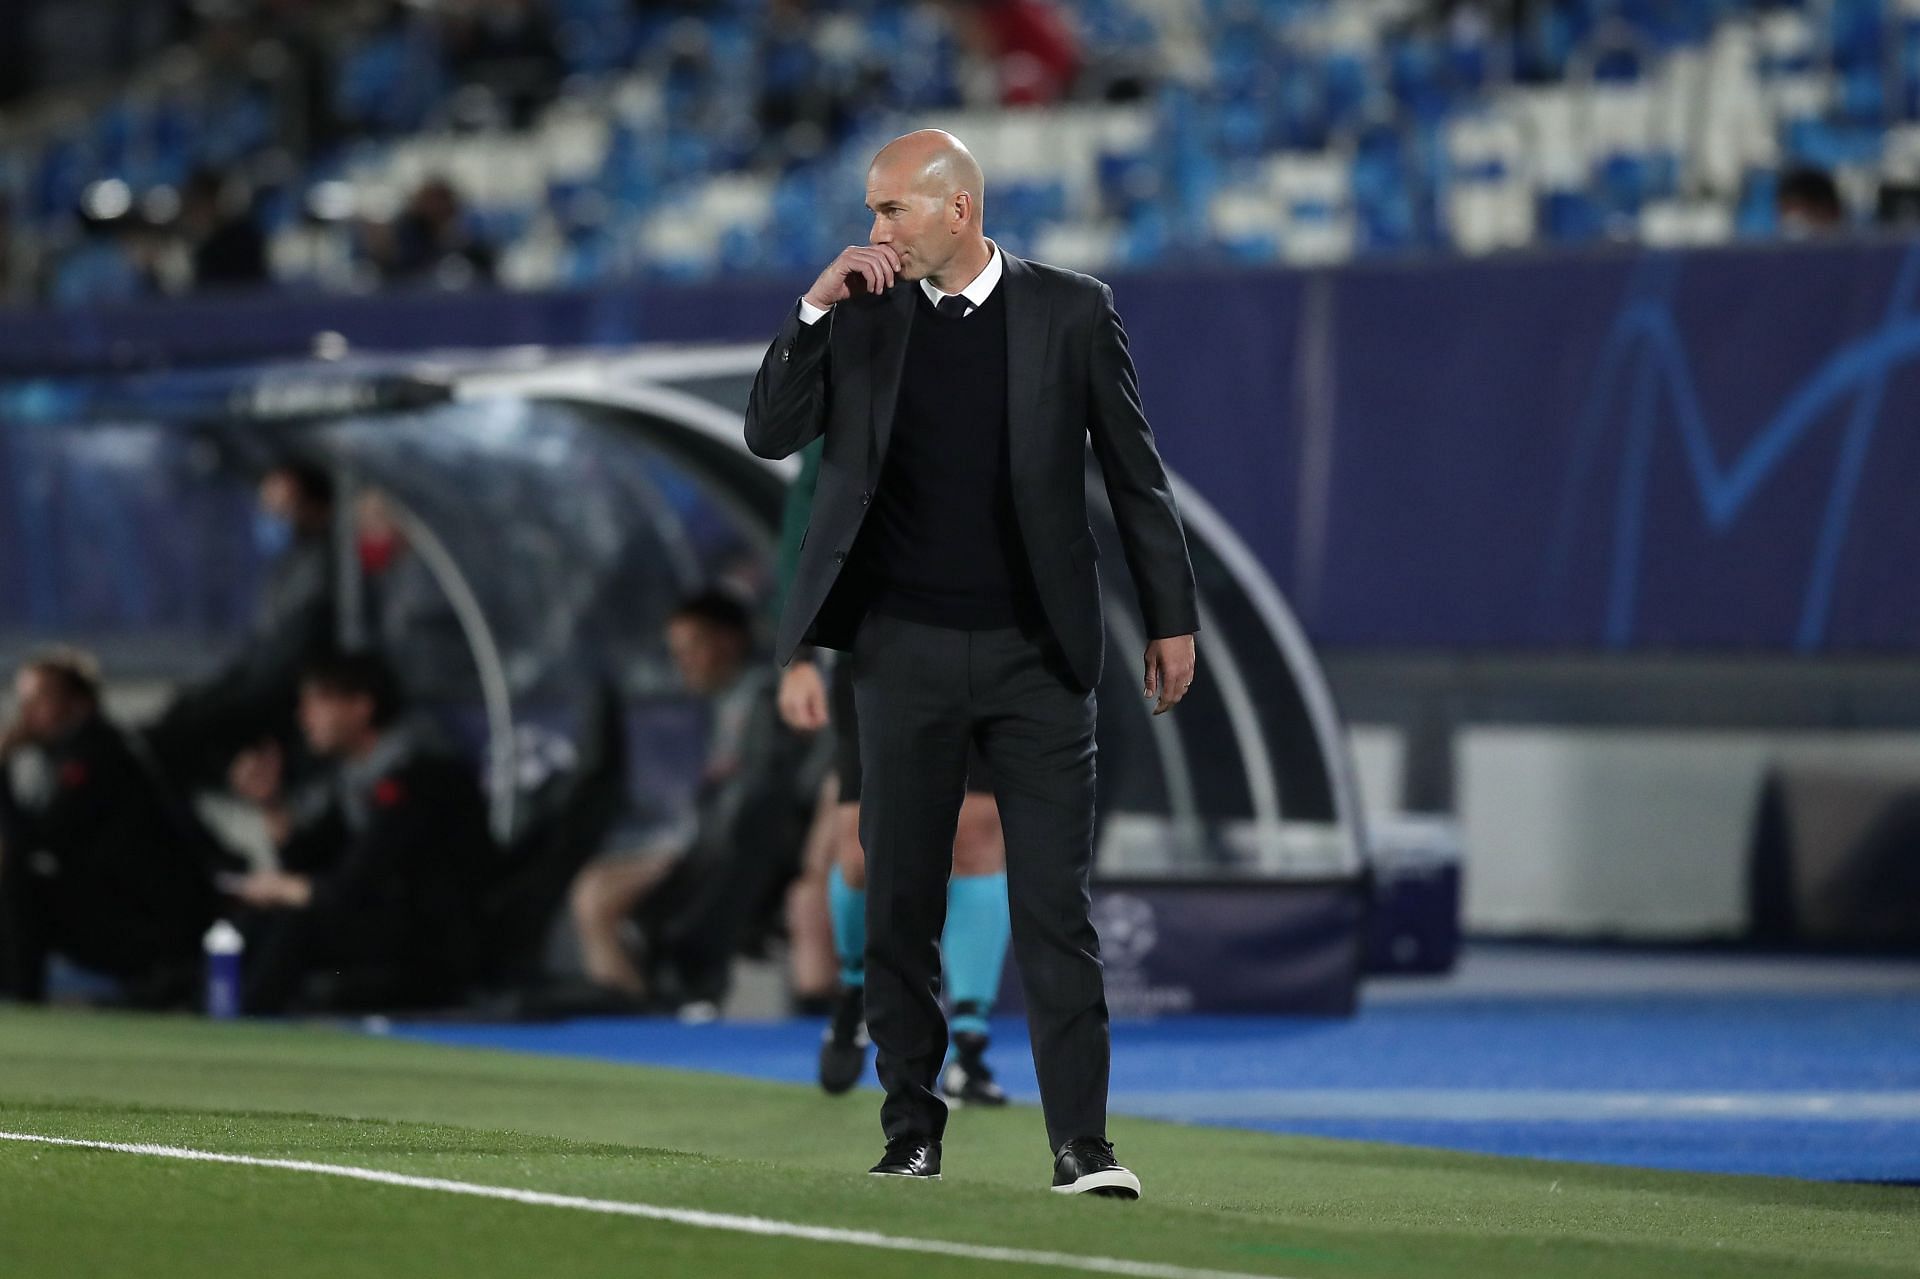 Zinedine Zidane won the UEFA Champions League as both player and manager.